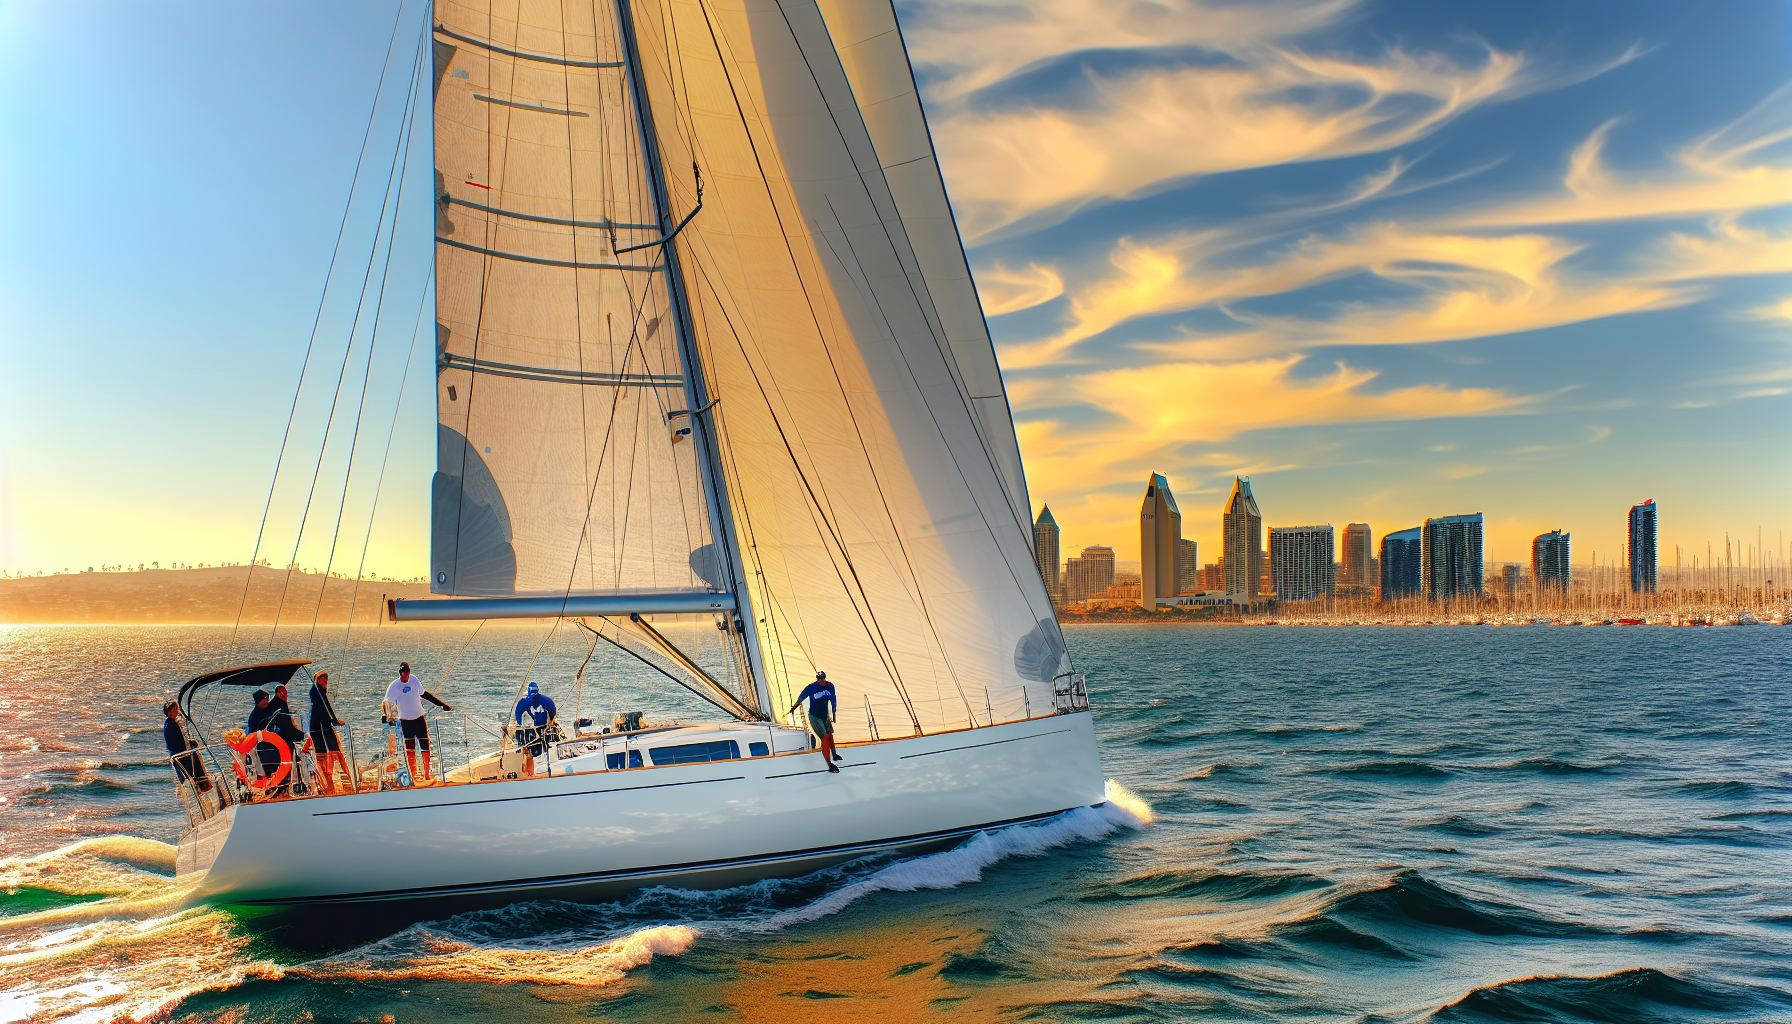 Sailing yacht with San Diego skyline in the background